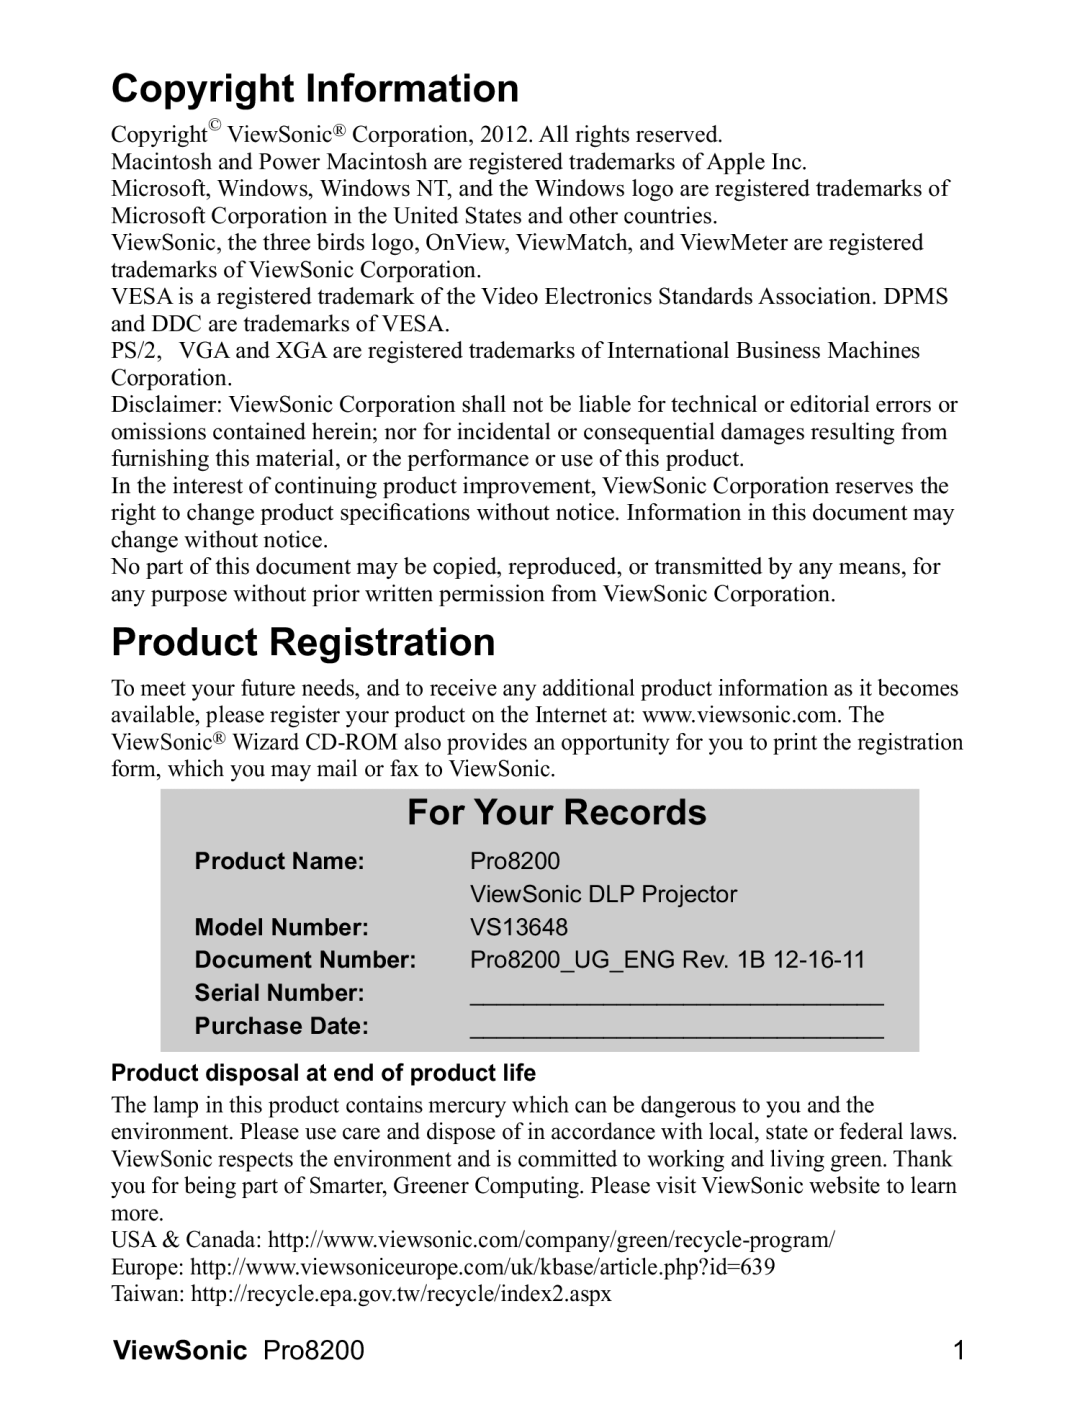 ViewSonic PRO8200 warranty Copyright Information, Product Registration, For Your Records, 9LHZ6RQLFPro8200 